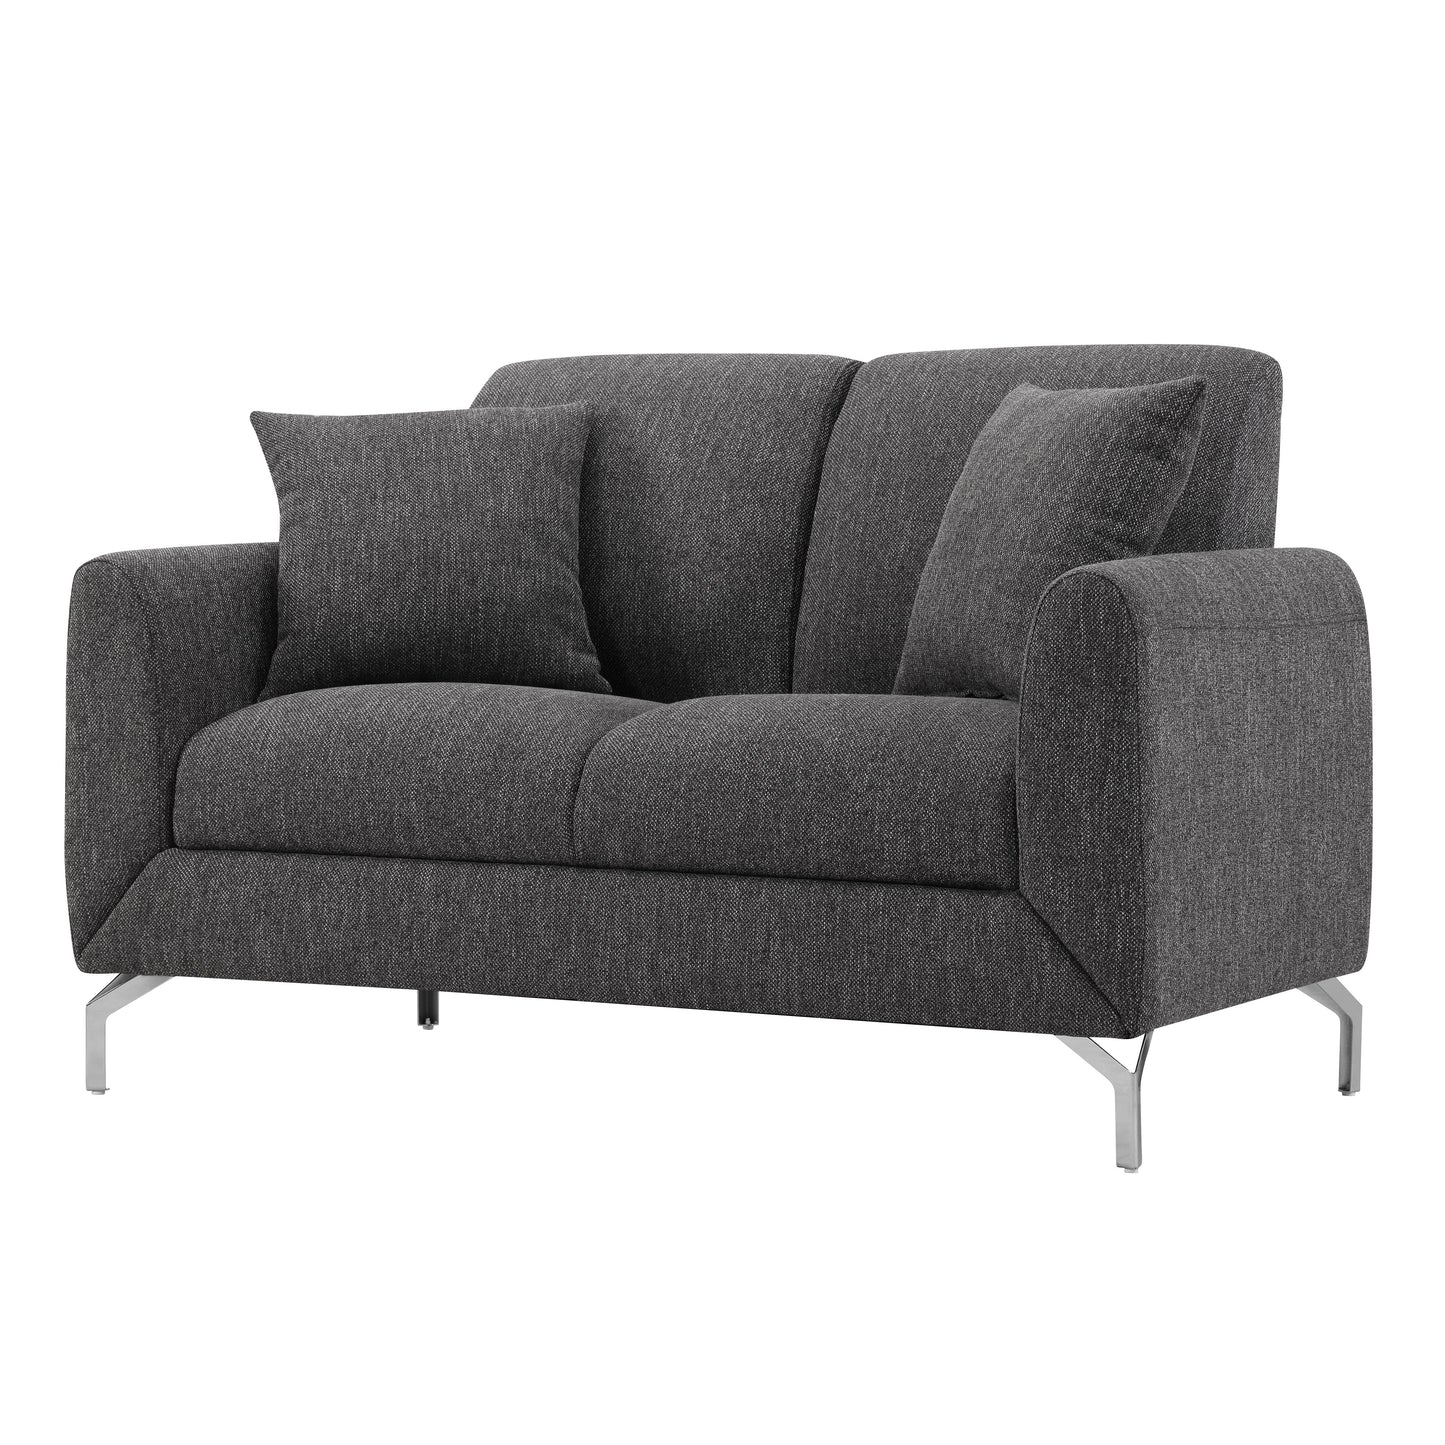 Noreen Contemporary Gray Fabric Rounded Arm Loveseat